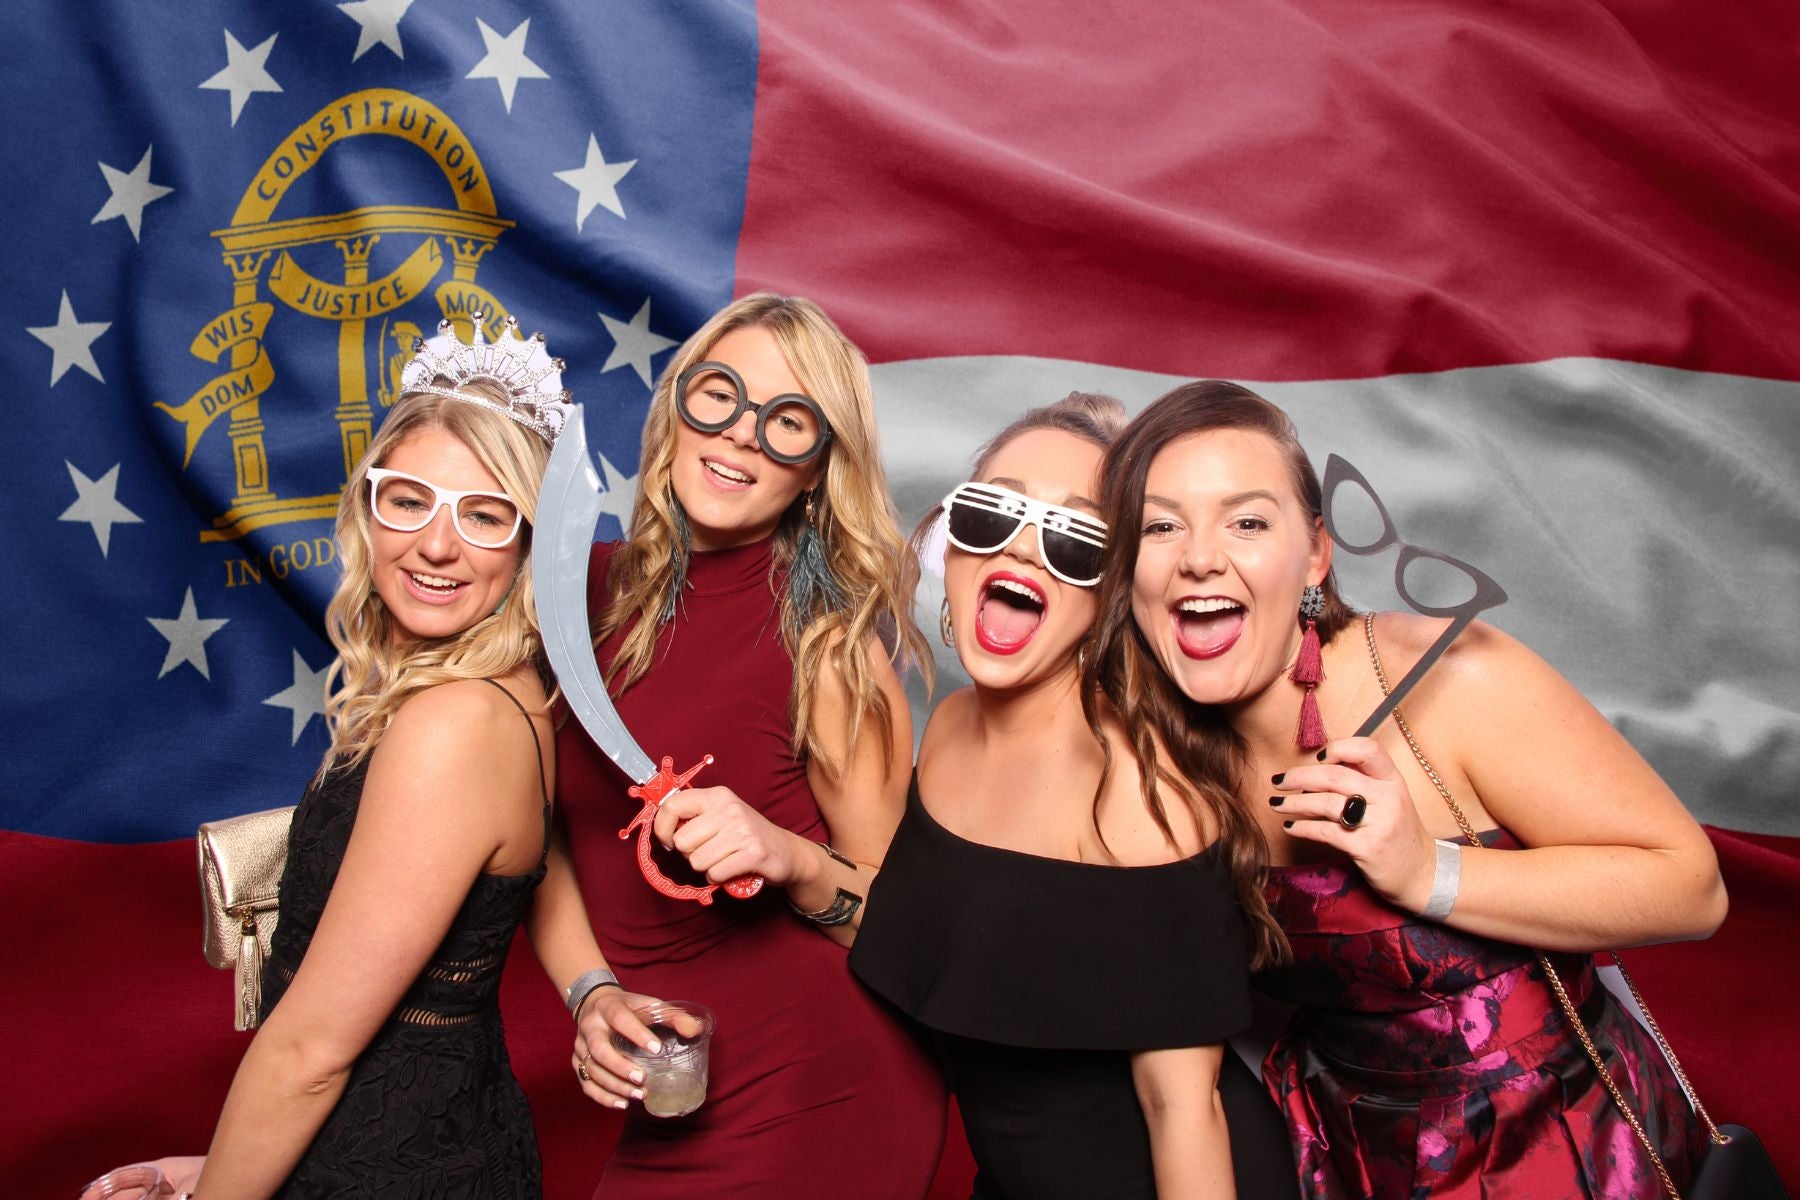 Women posing with photo booth props in front of a Georgia flag background